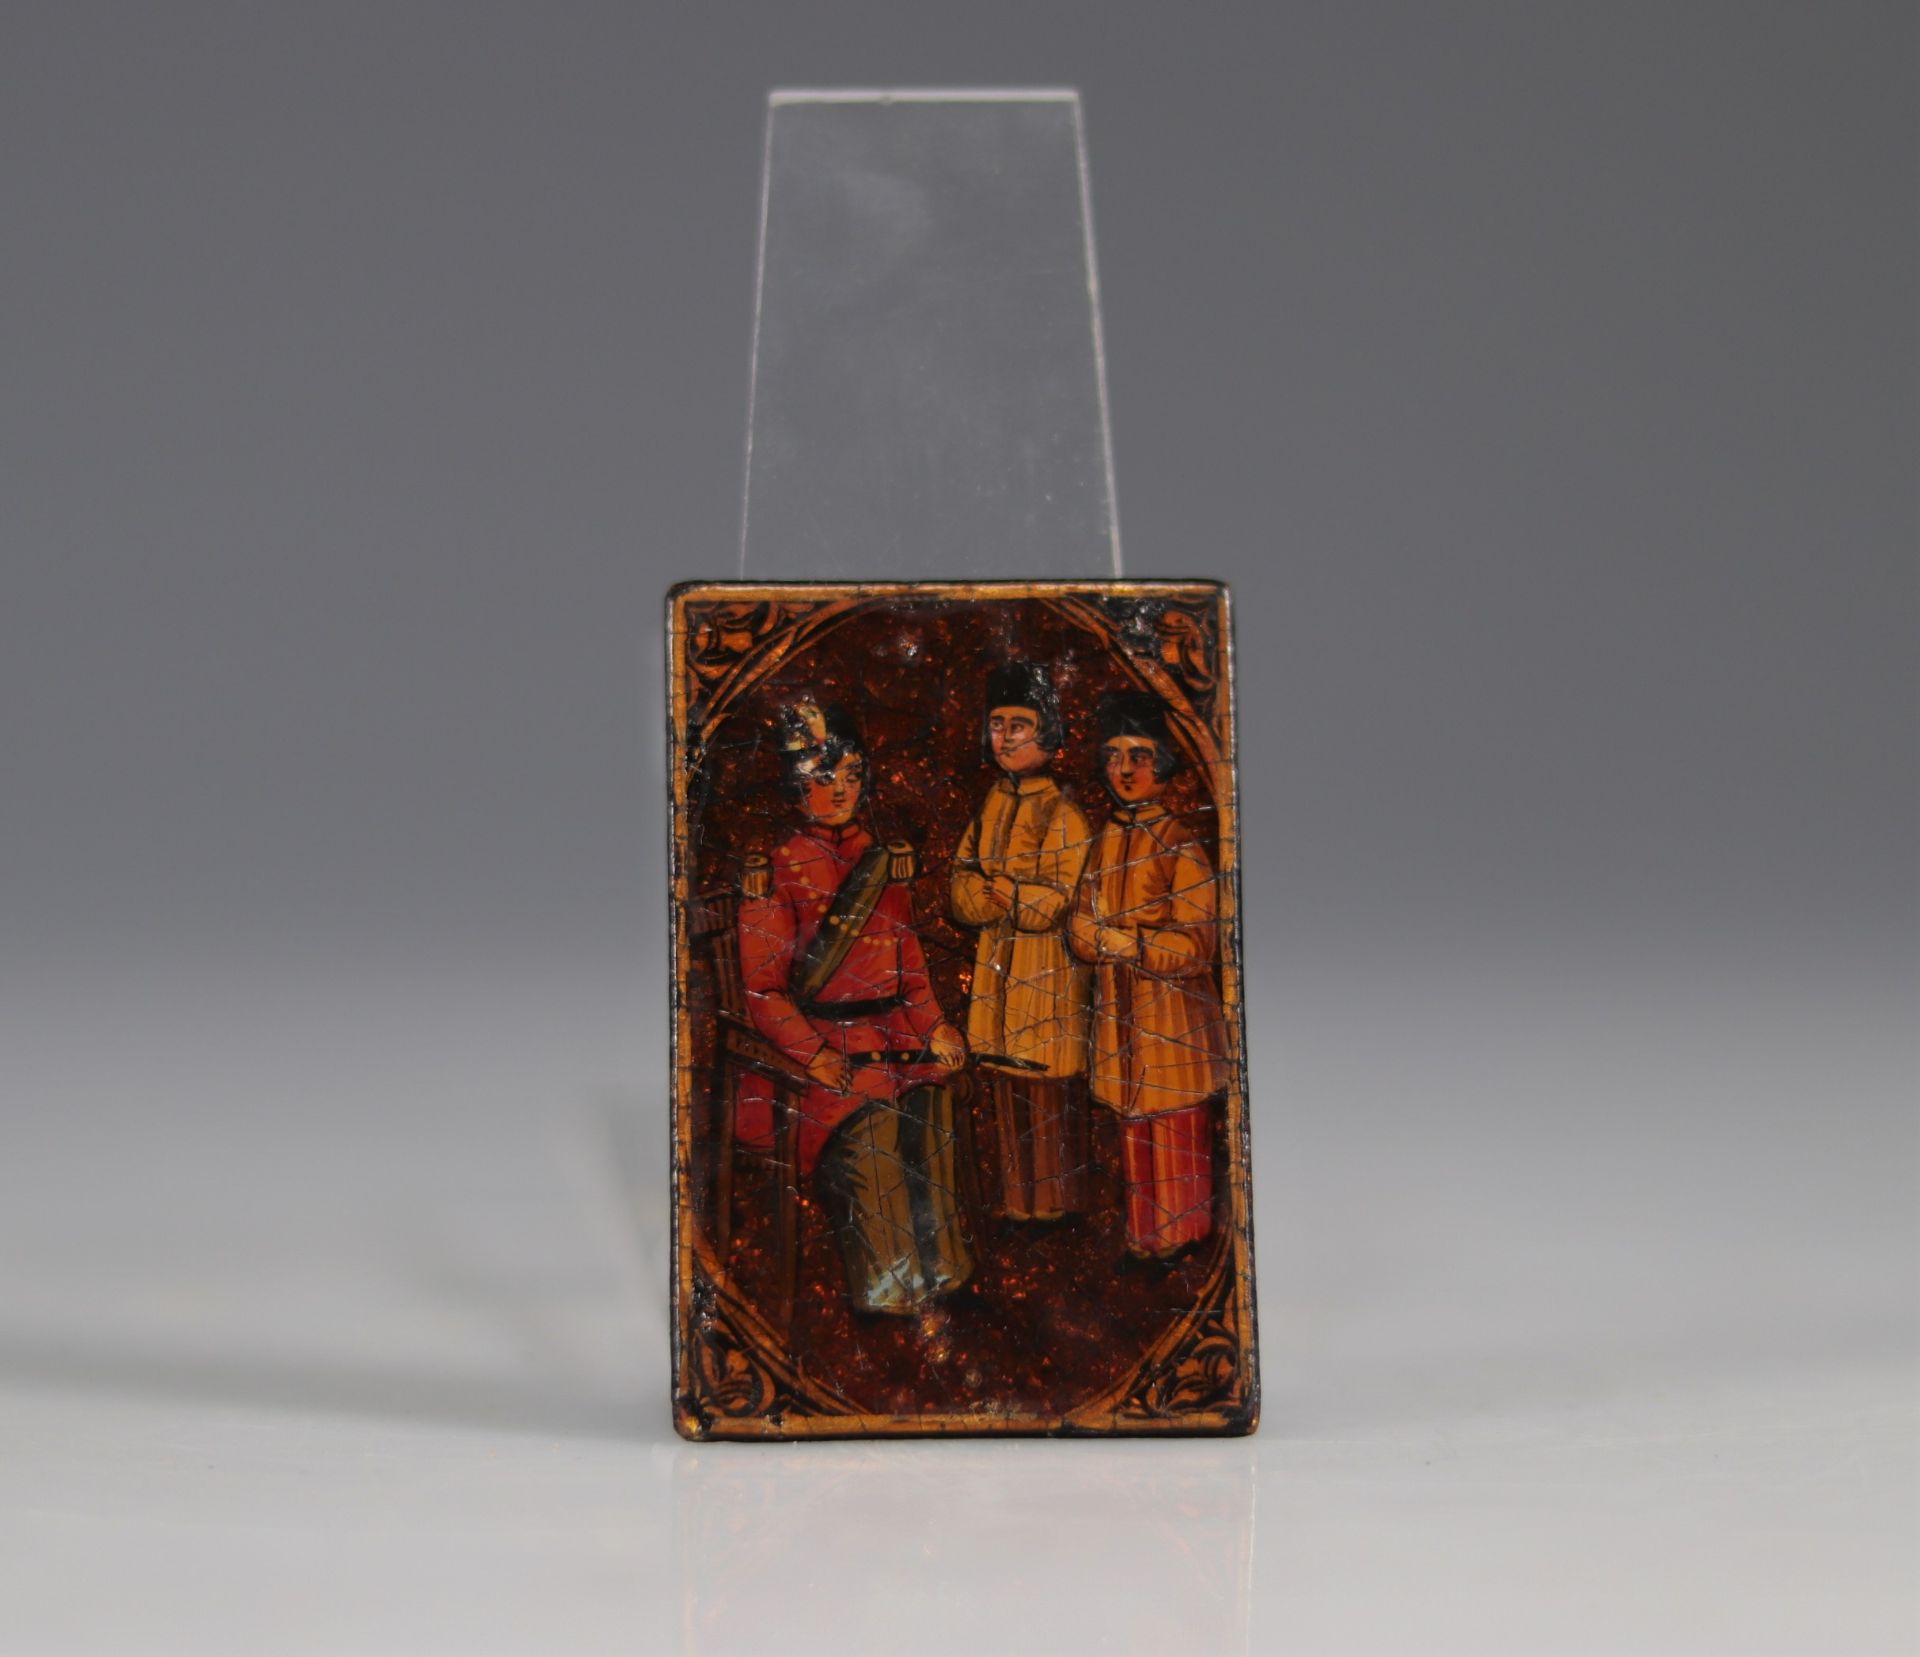 Lot of 29 19th century Kadjar playing cards in polychrome lacquer with various decorations - Bild 9 aus 10